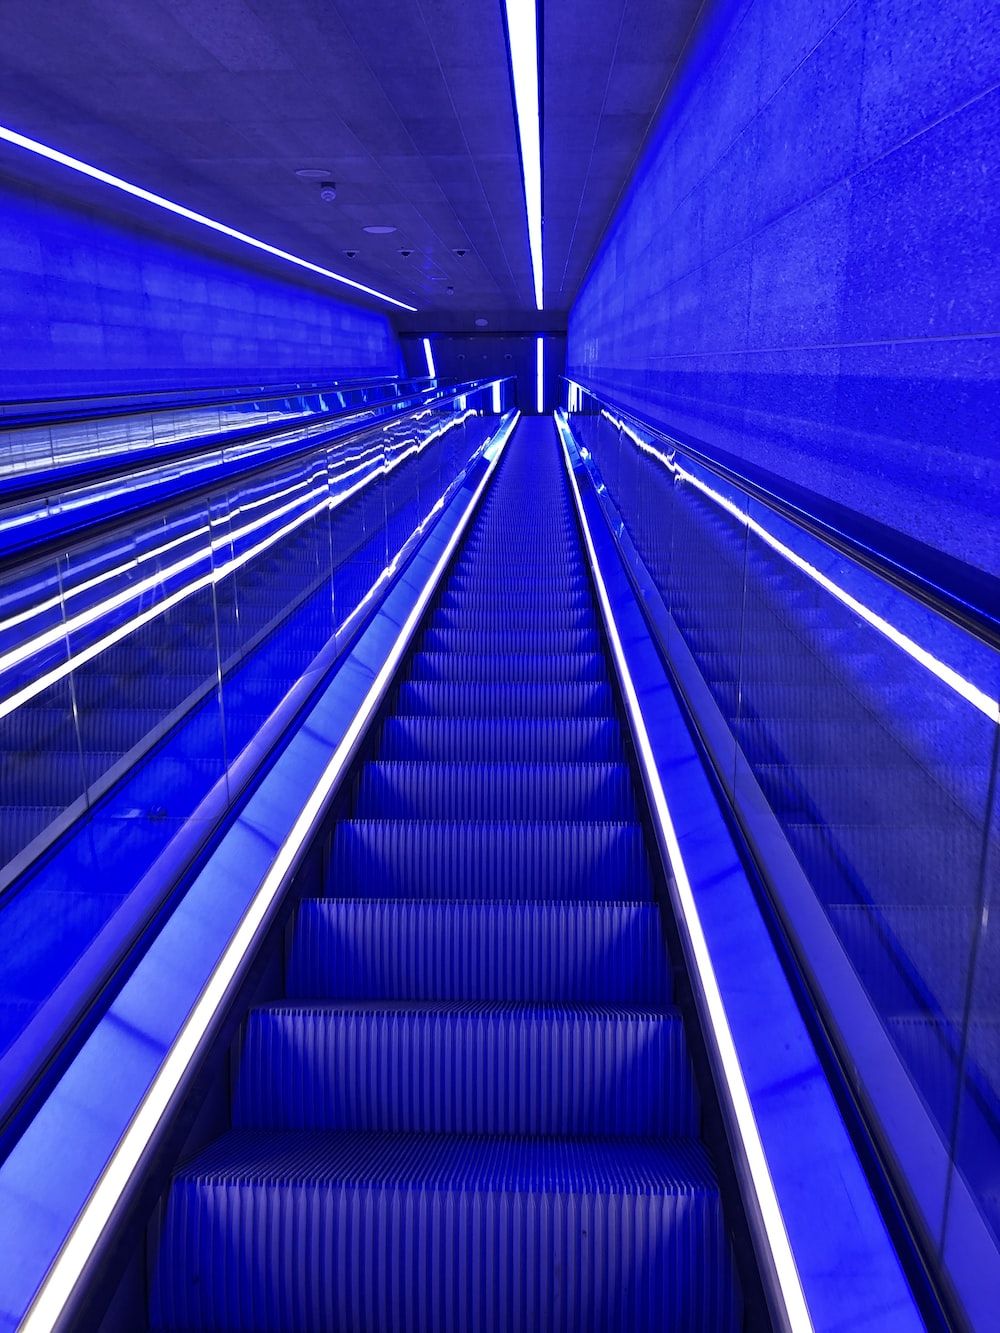 Blue and white escalator in a building - Neon blue